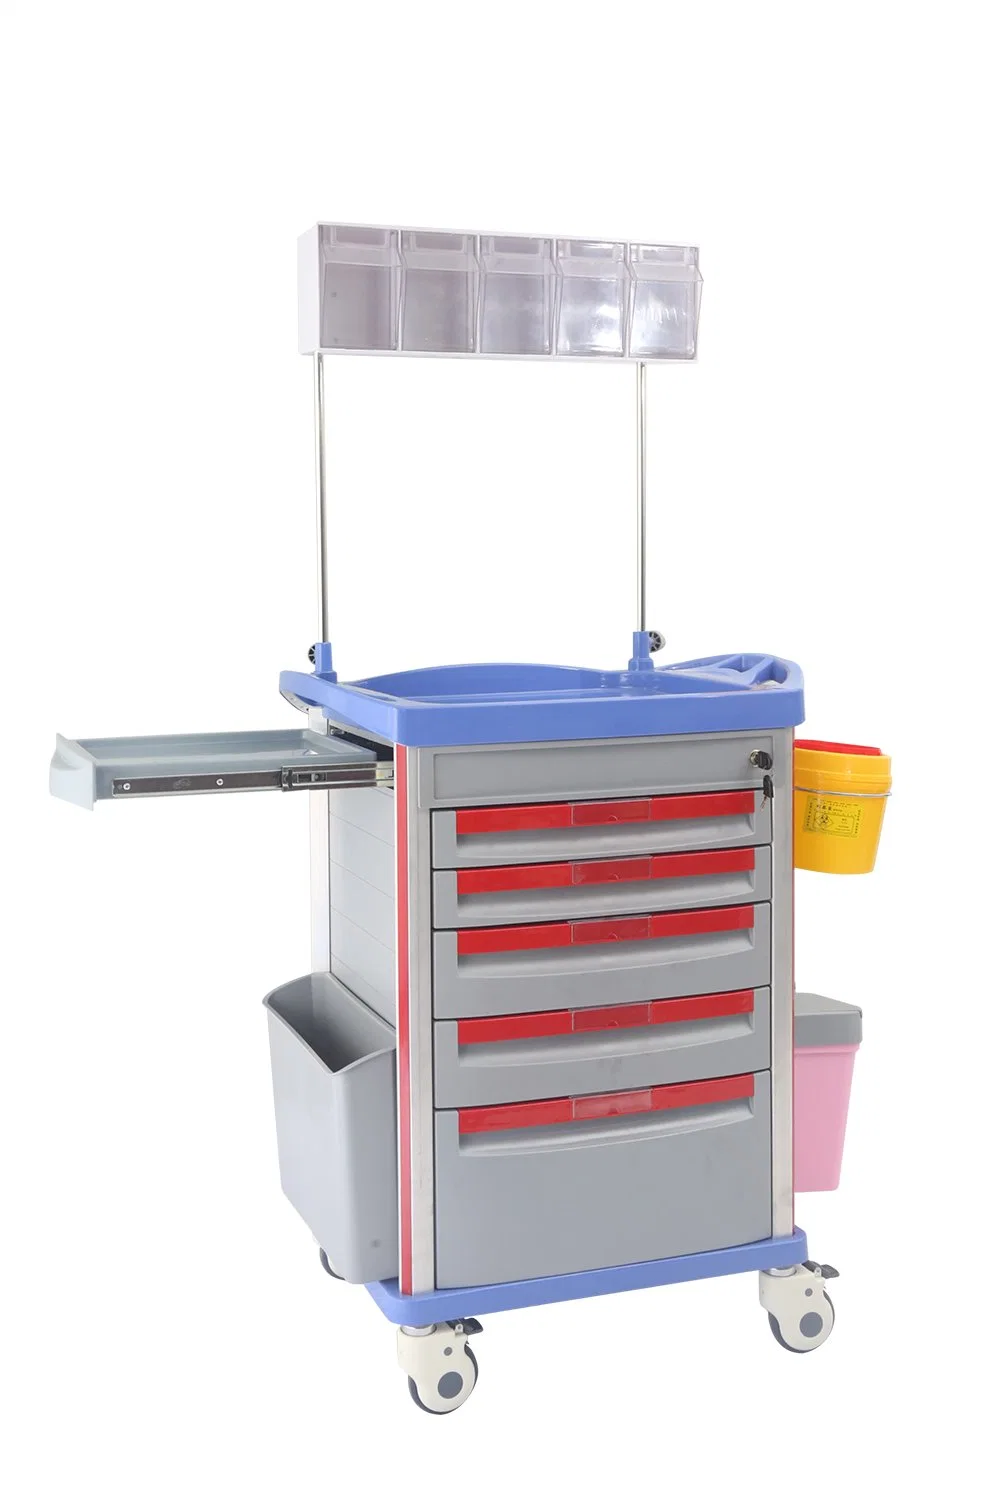 [At850] ABS Anesthesia Trolley and Cart with Drawers for Medical,Emergency,Logistic,Linen, Treatment, Medicine Distribution as Hospital Furniture and Equipment